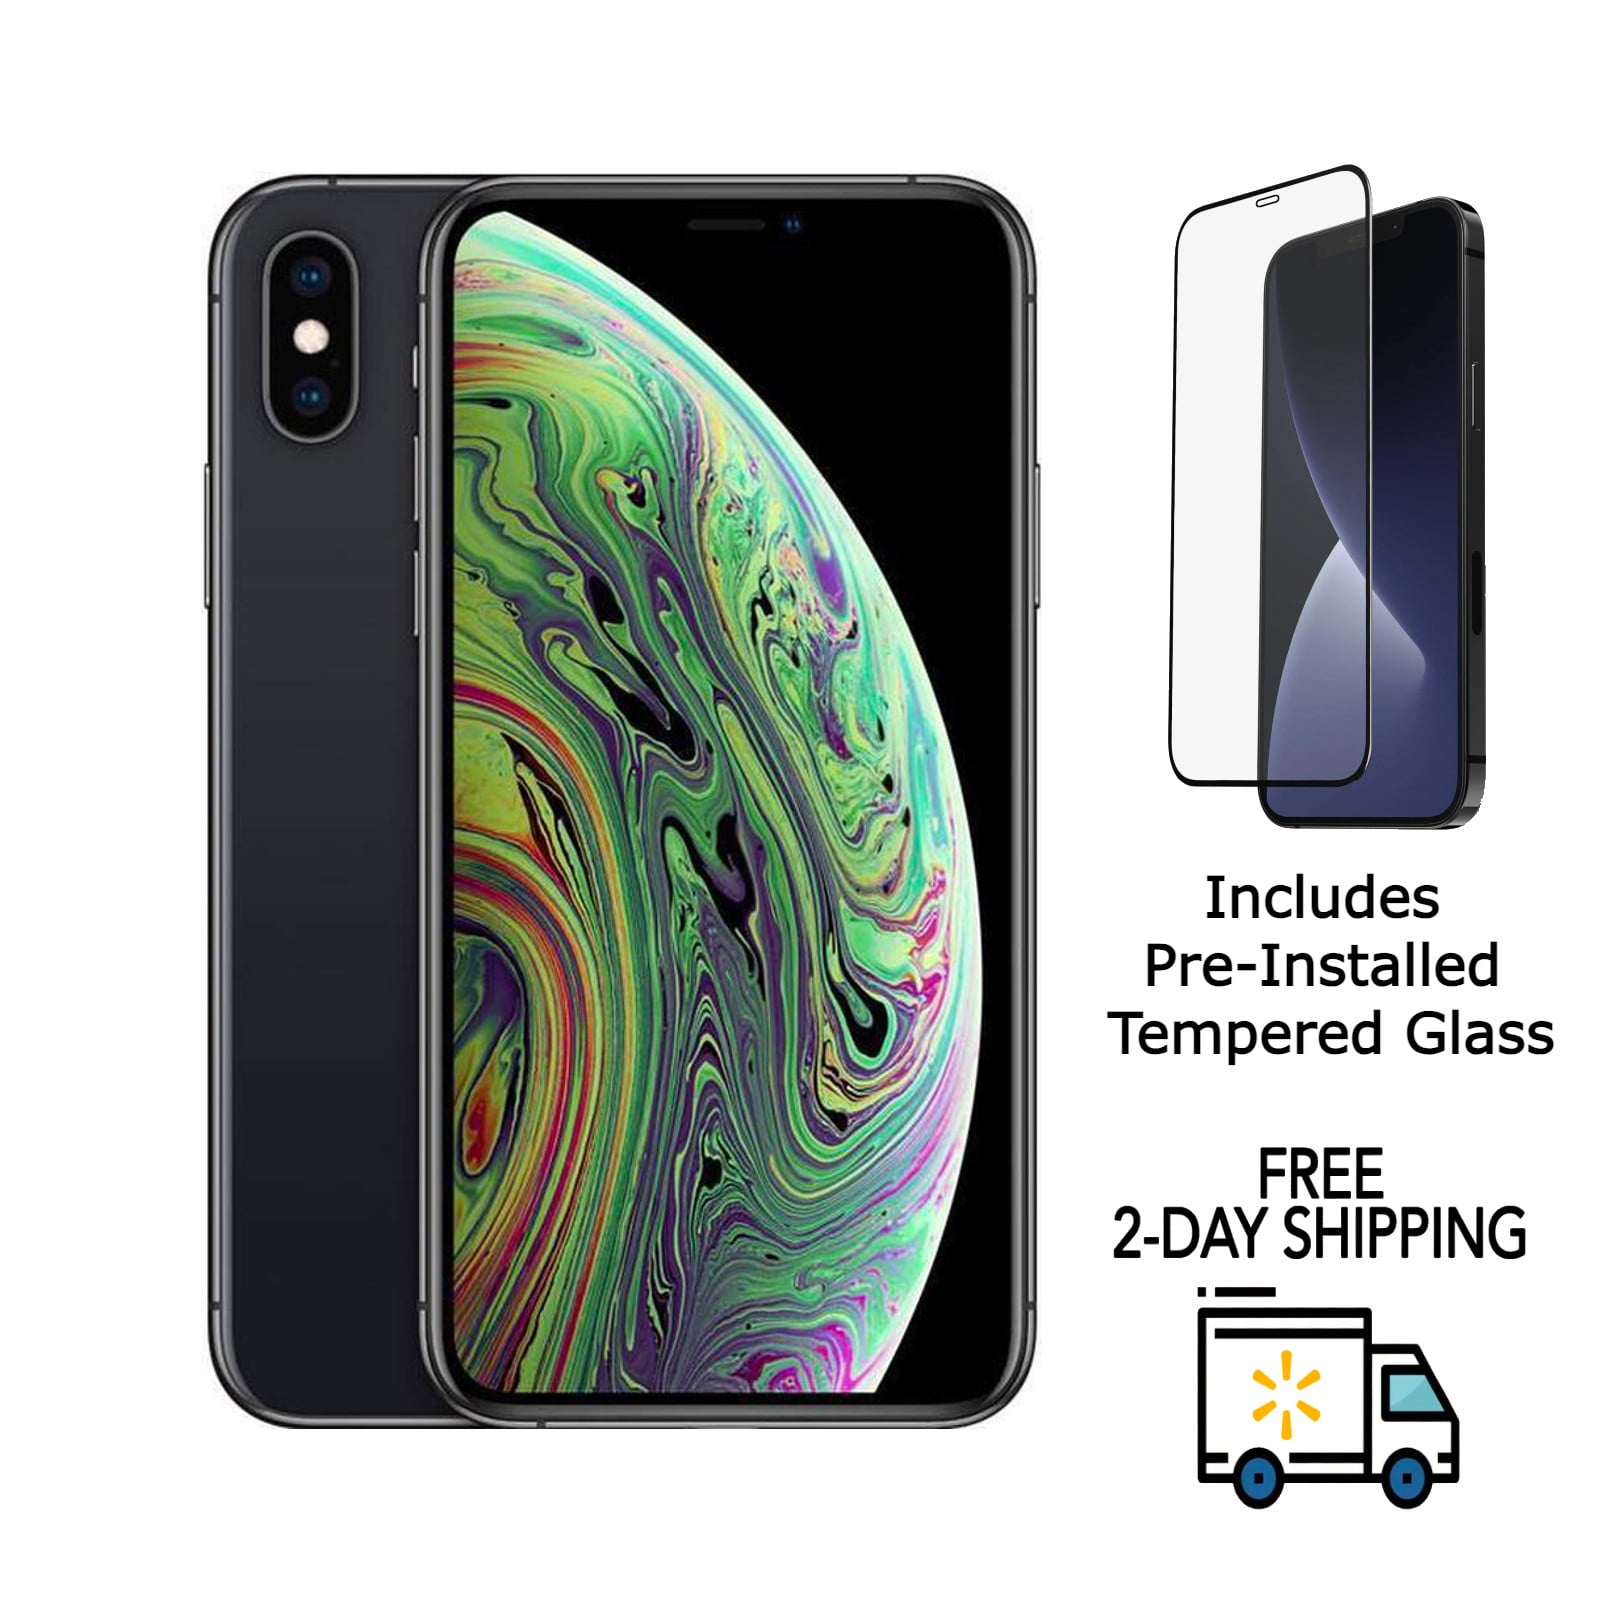 Restored Apple iPhone XS A1920 (Fully Unlocked) 64GB Space Gray w/  Pre-Installed Tempered Glass (Refurbished)